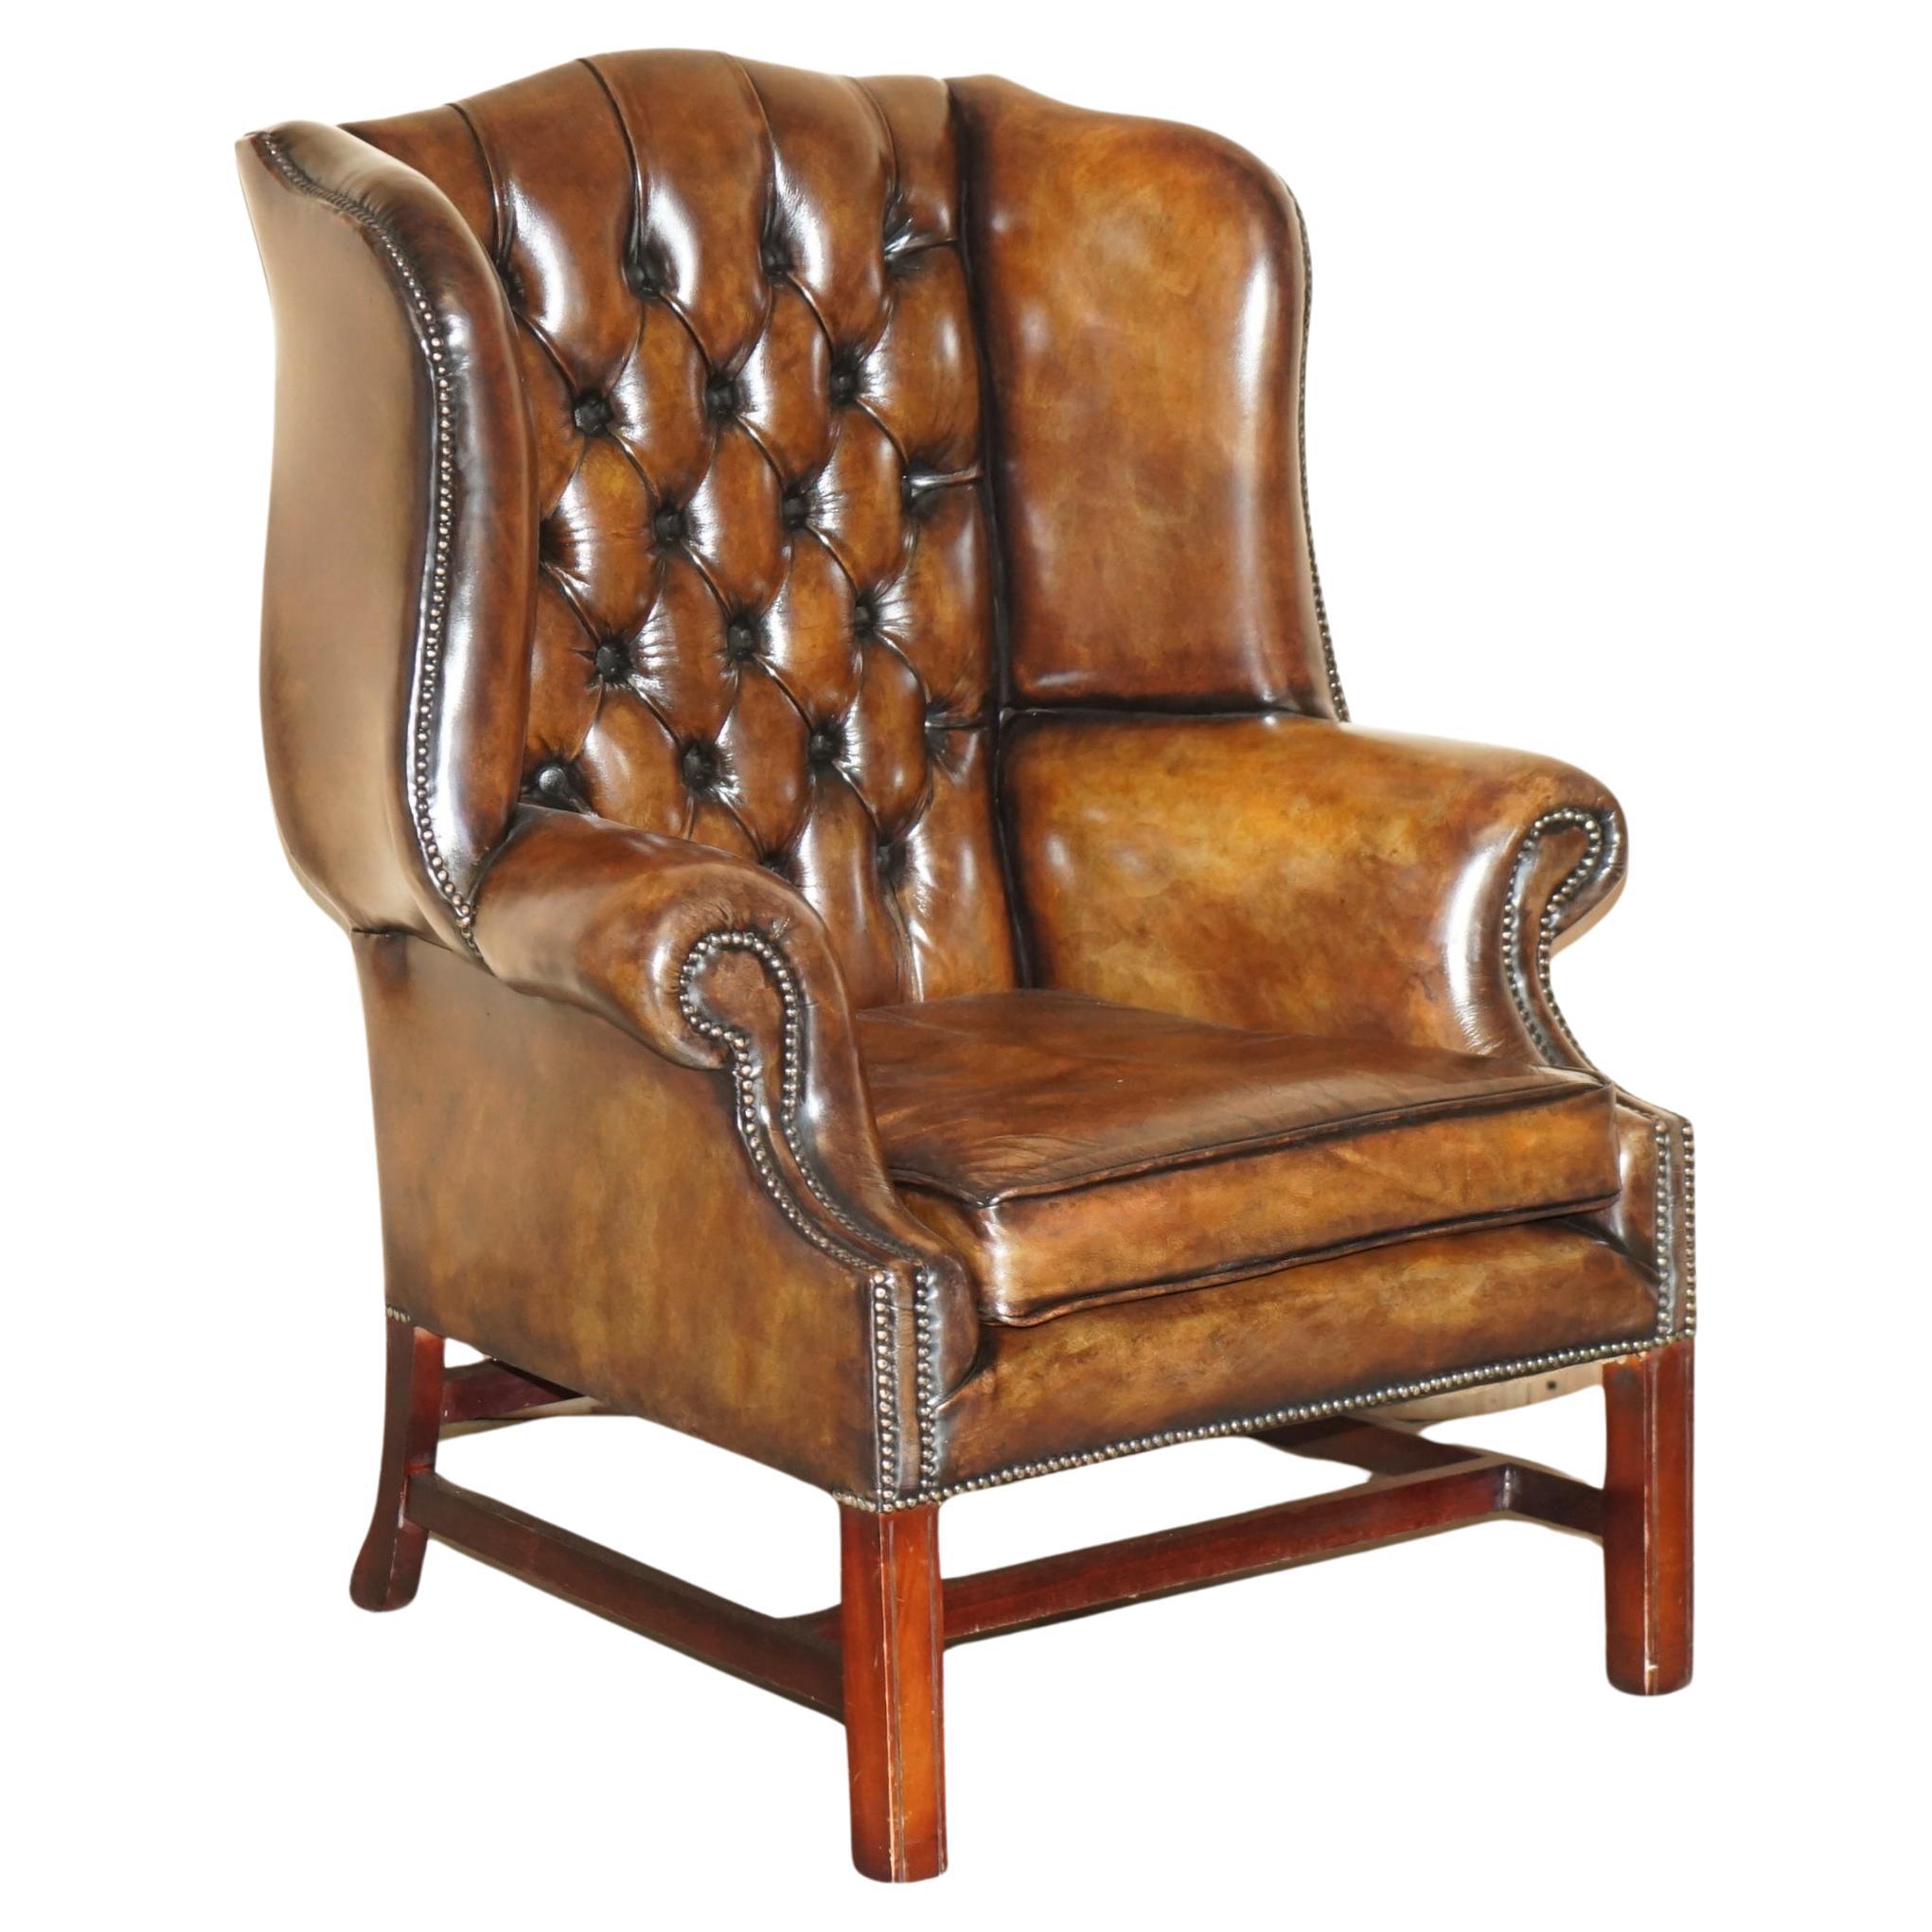 COMFORTABLE ViNTAGE RESTORED BROWN LEATHER TUFTED CHESTERFIELD WINGBACK ARMCHAIR For Sale